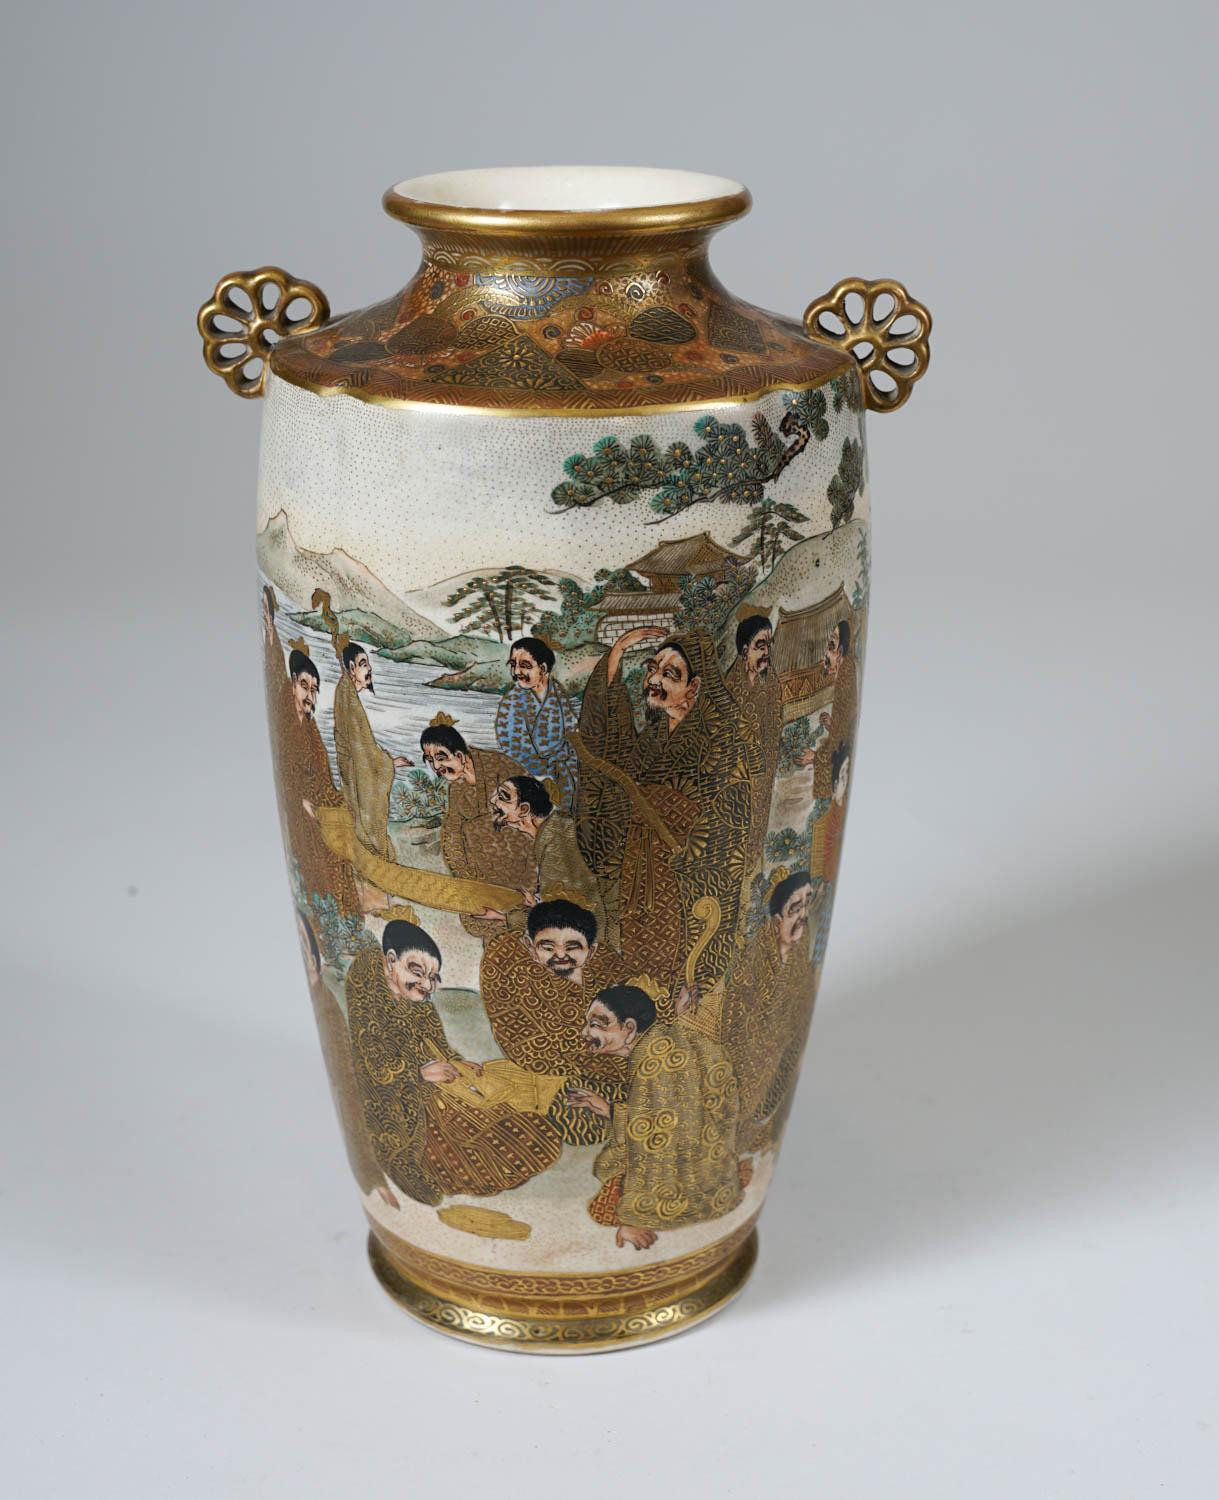 23 attractive Vintage Japanese Satsuma Vase 2024 free download vintage japanese satsuma vase of igavel auctions japanese satsuma vase decorated with immortals throughout category asian art